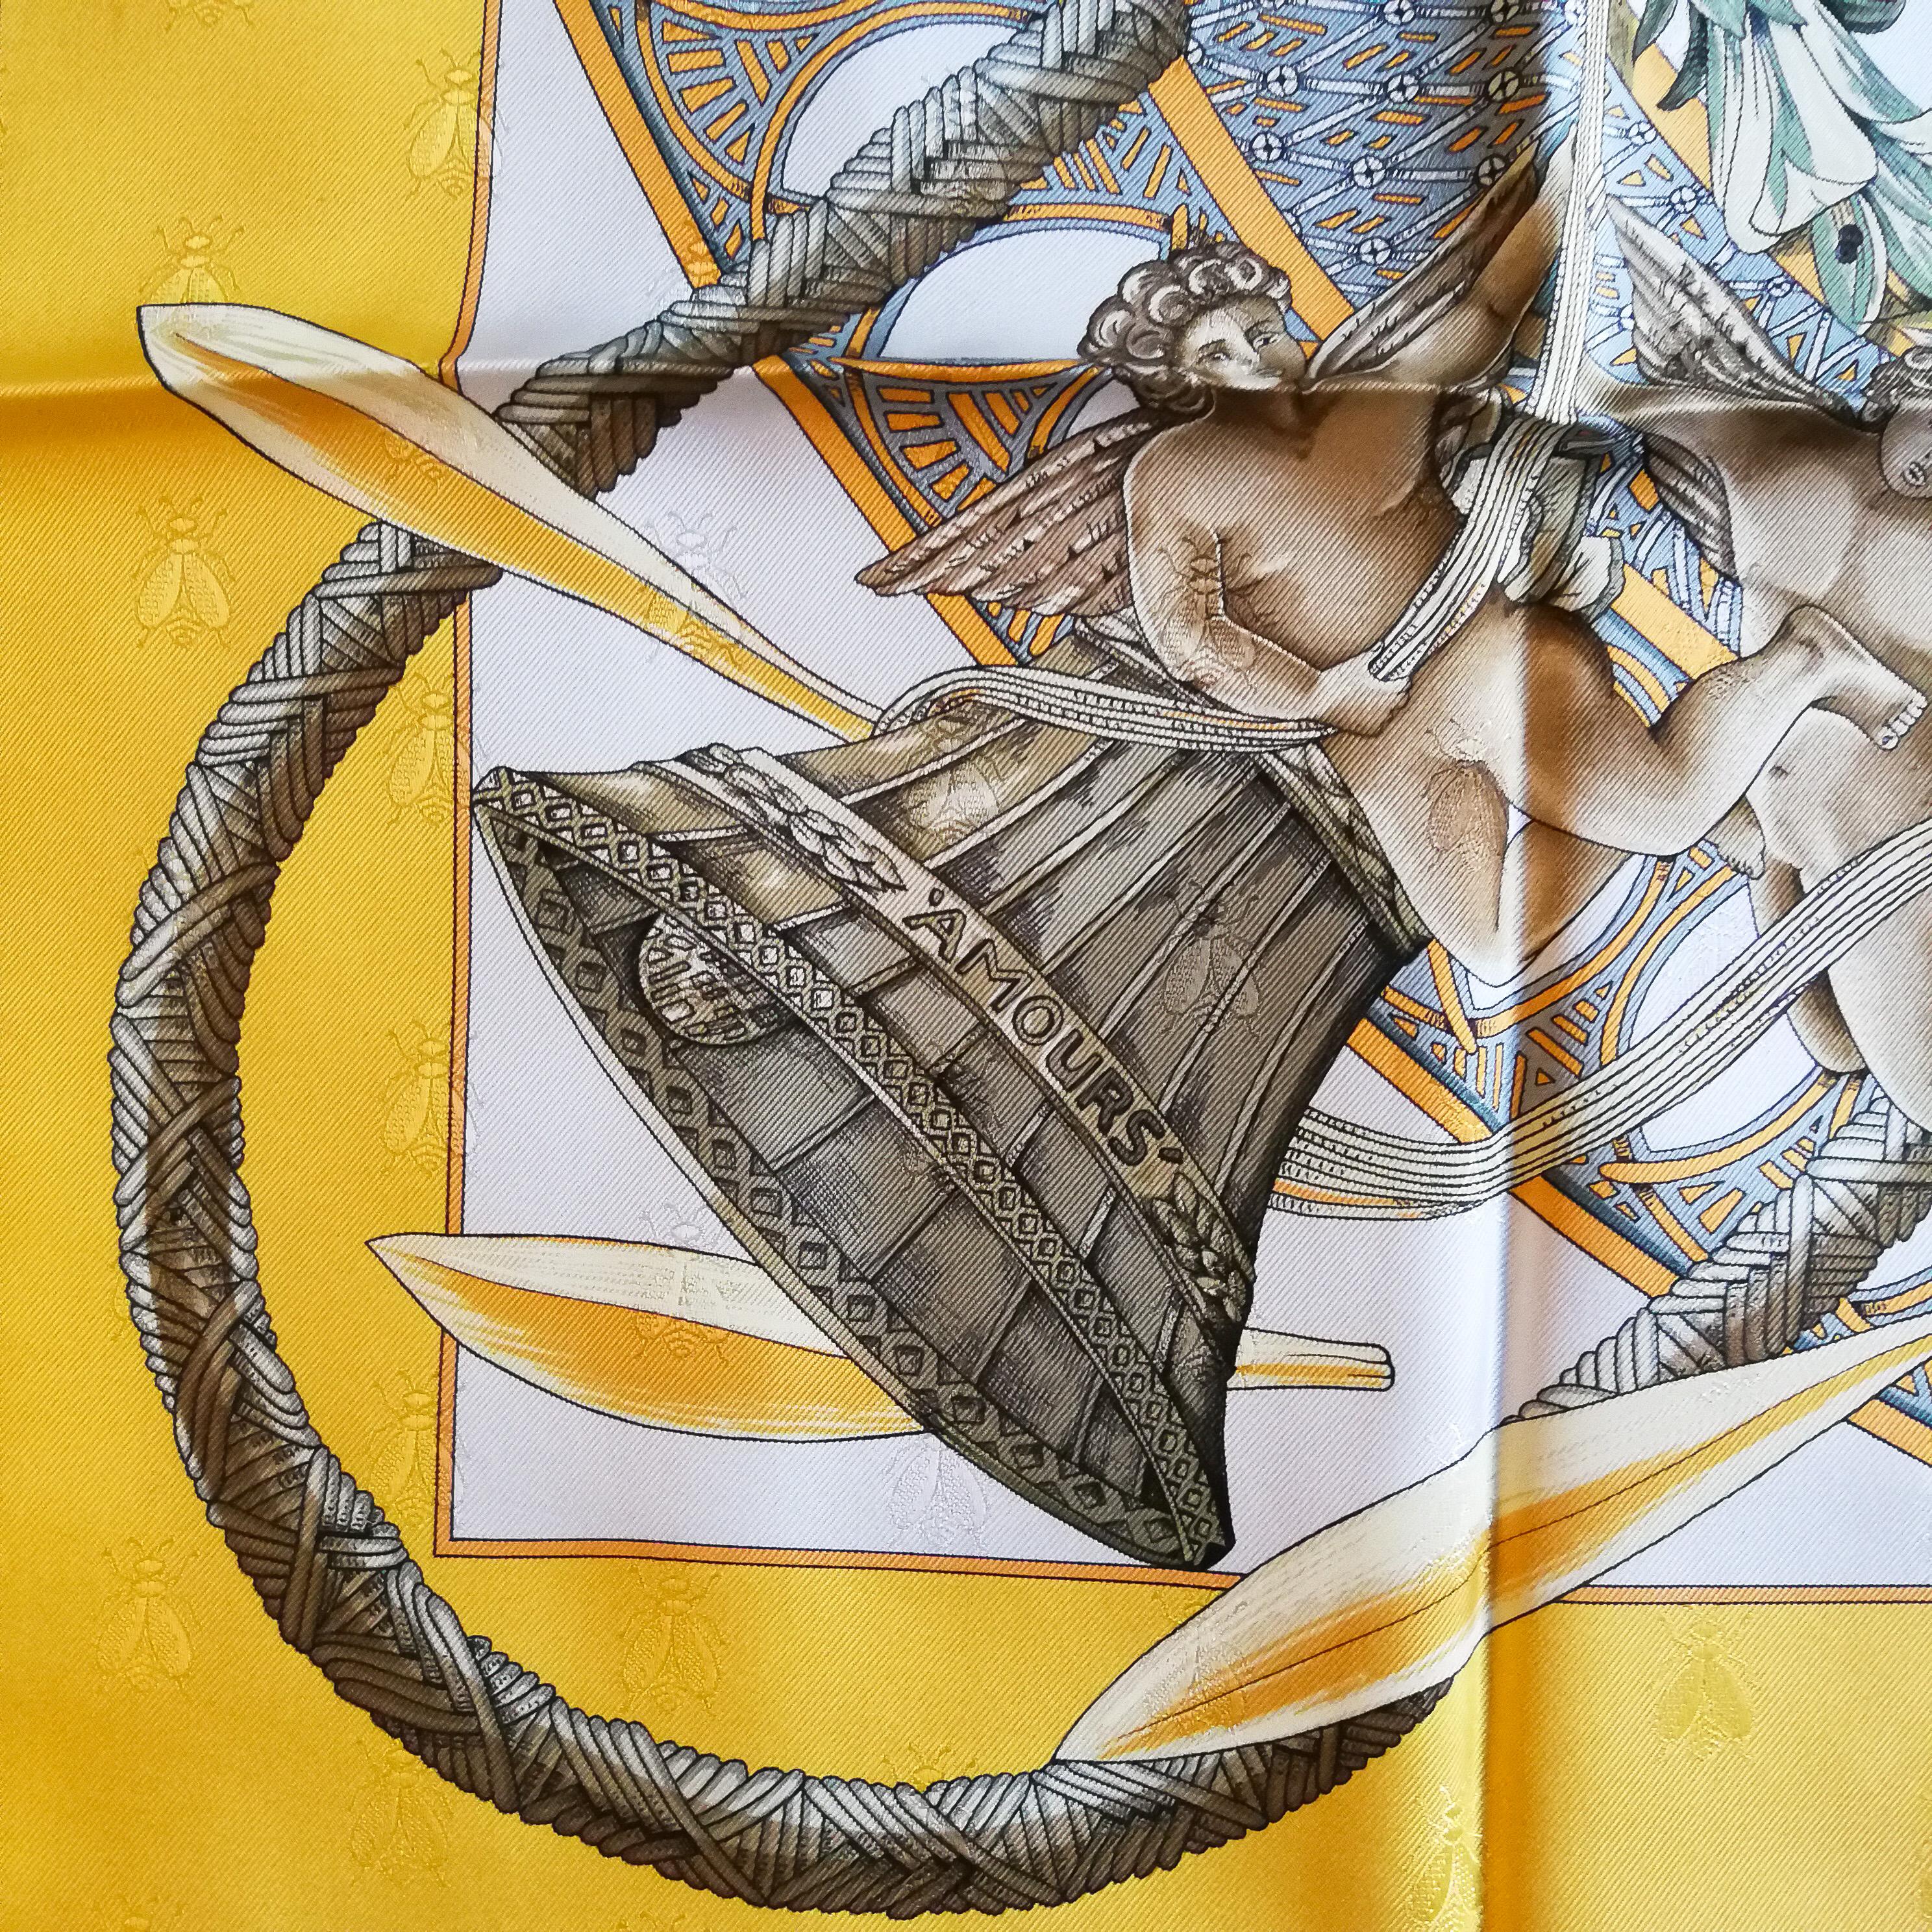 A charming and highly attractive silk scarf, designed by Annie Faivre for Hermes, in 1998. Of the highest quality always associated with Hermes, the celebrated Paris design house, this is such a clever design, with its witty title, a quiver and